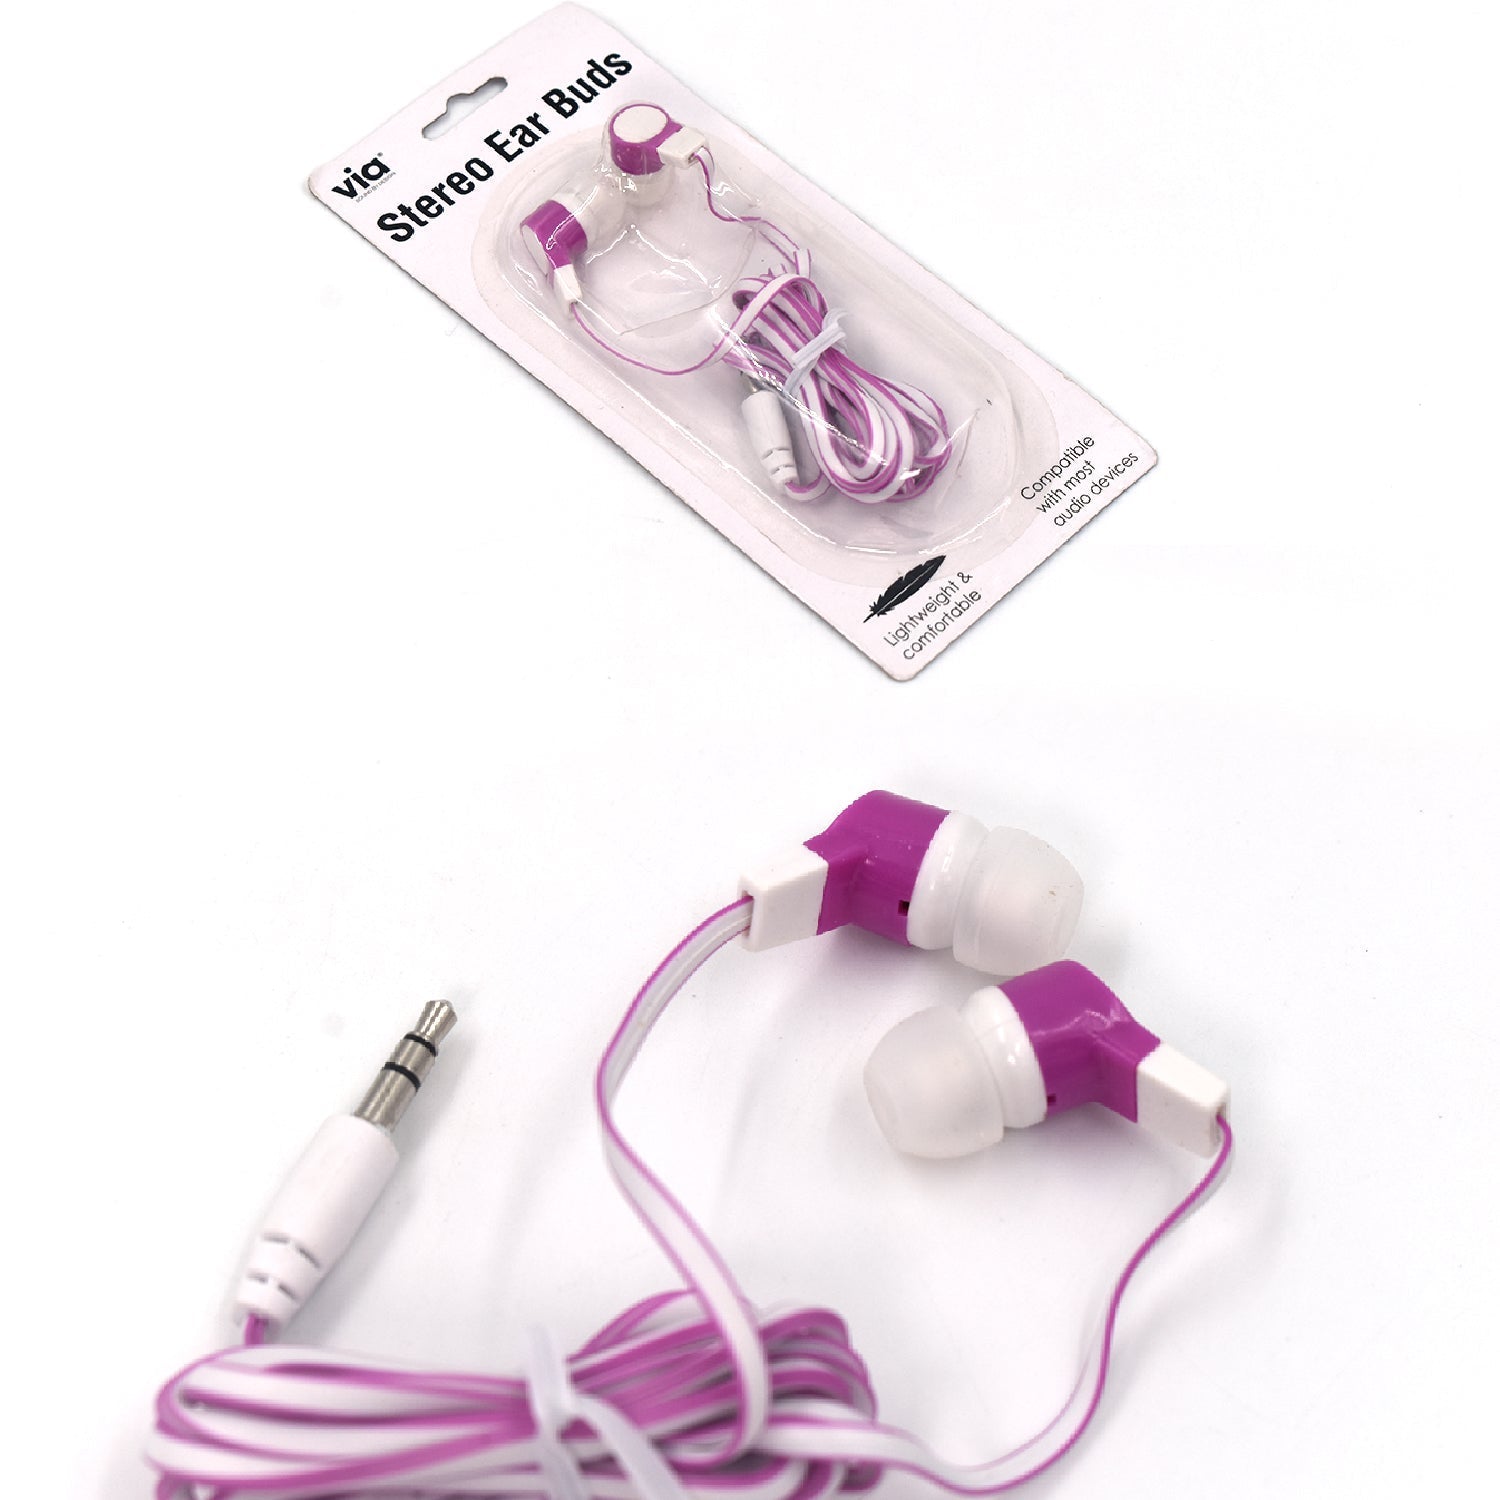 Earphones with mix different colors and various shapes and designs (1 pc)